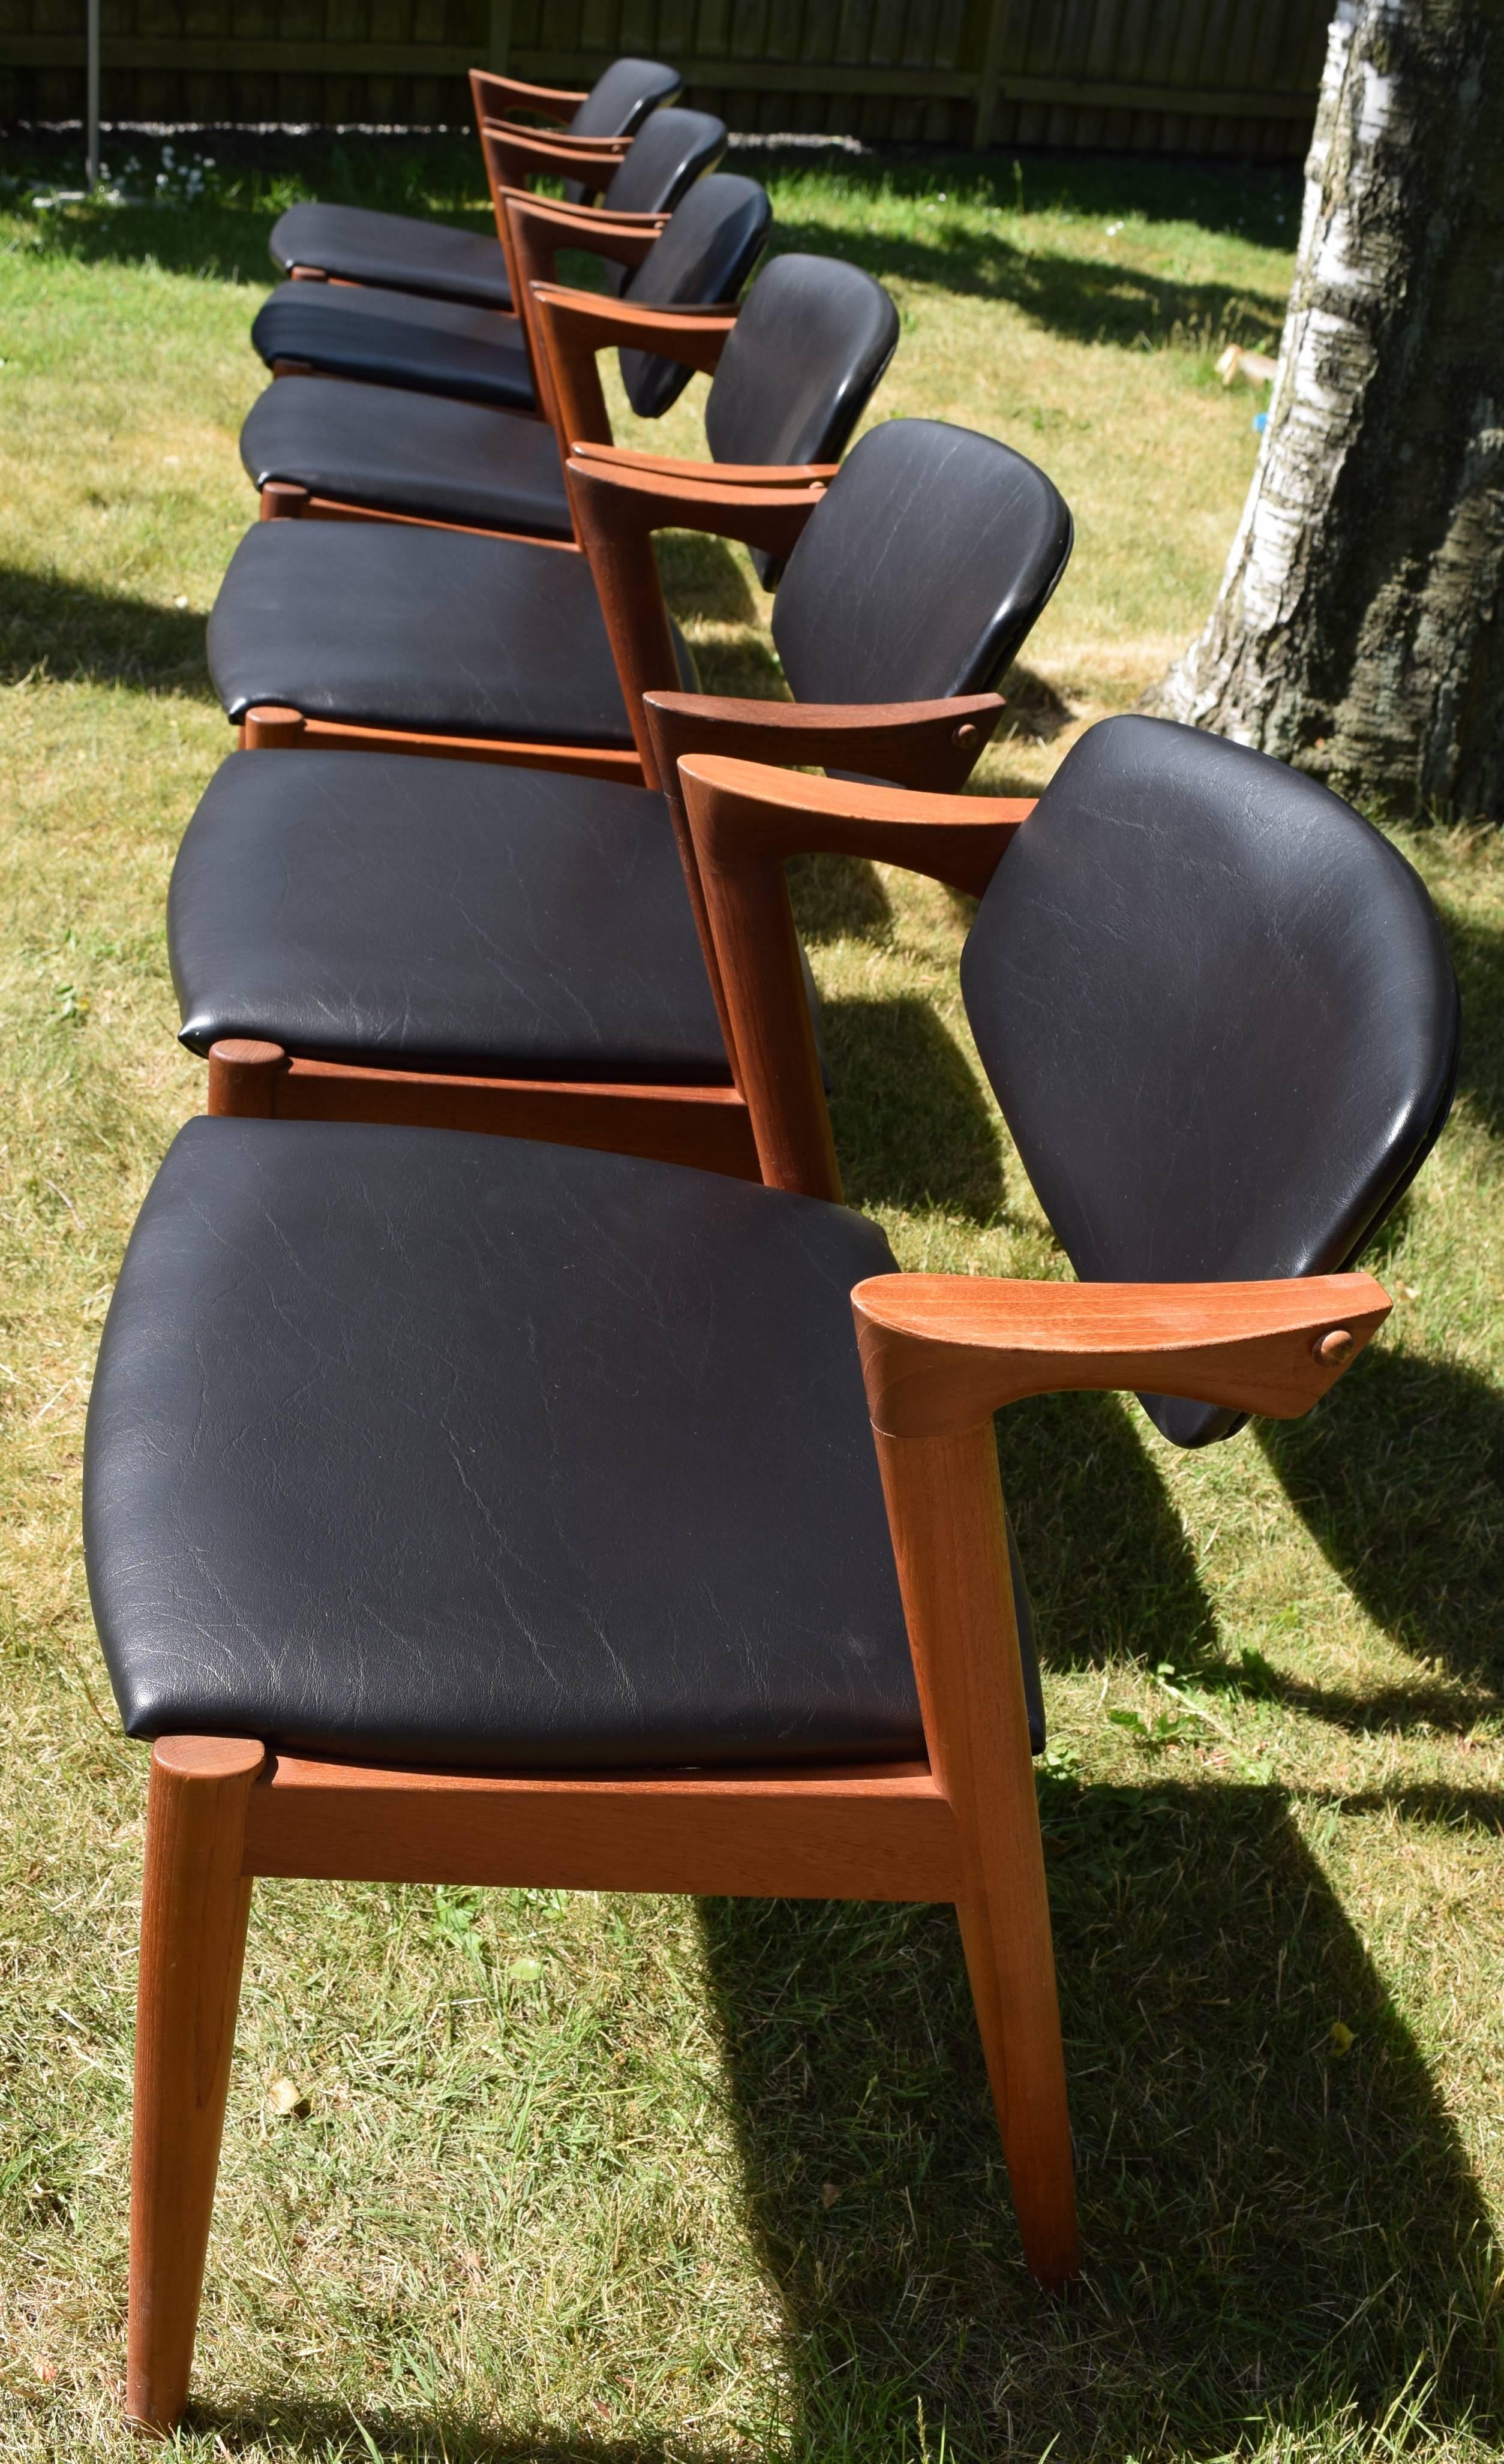 This set of six teak dining chairs was designed by Kai Kristiansen in the 1950s for Schou Andersen Møbelfabrik. These chairs have been recovered with black leatherette.